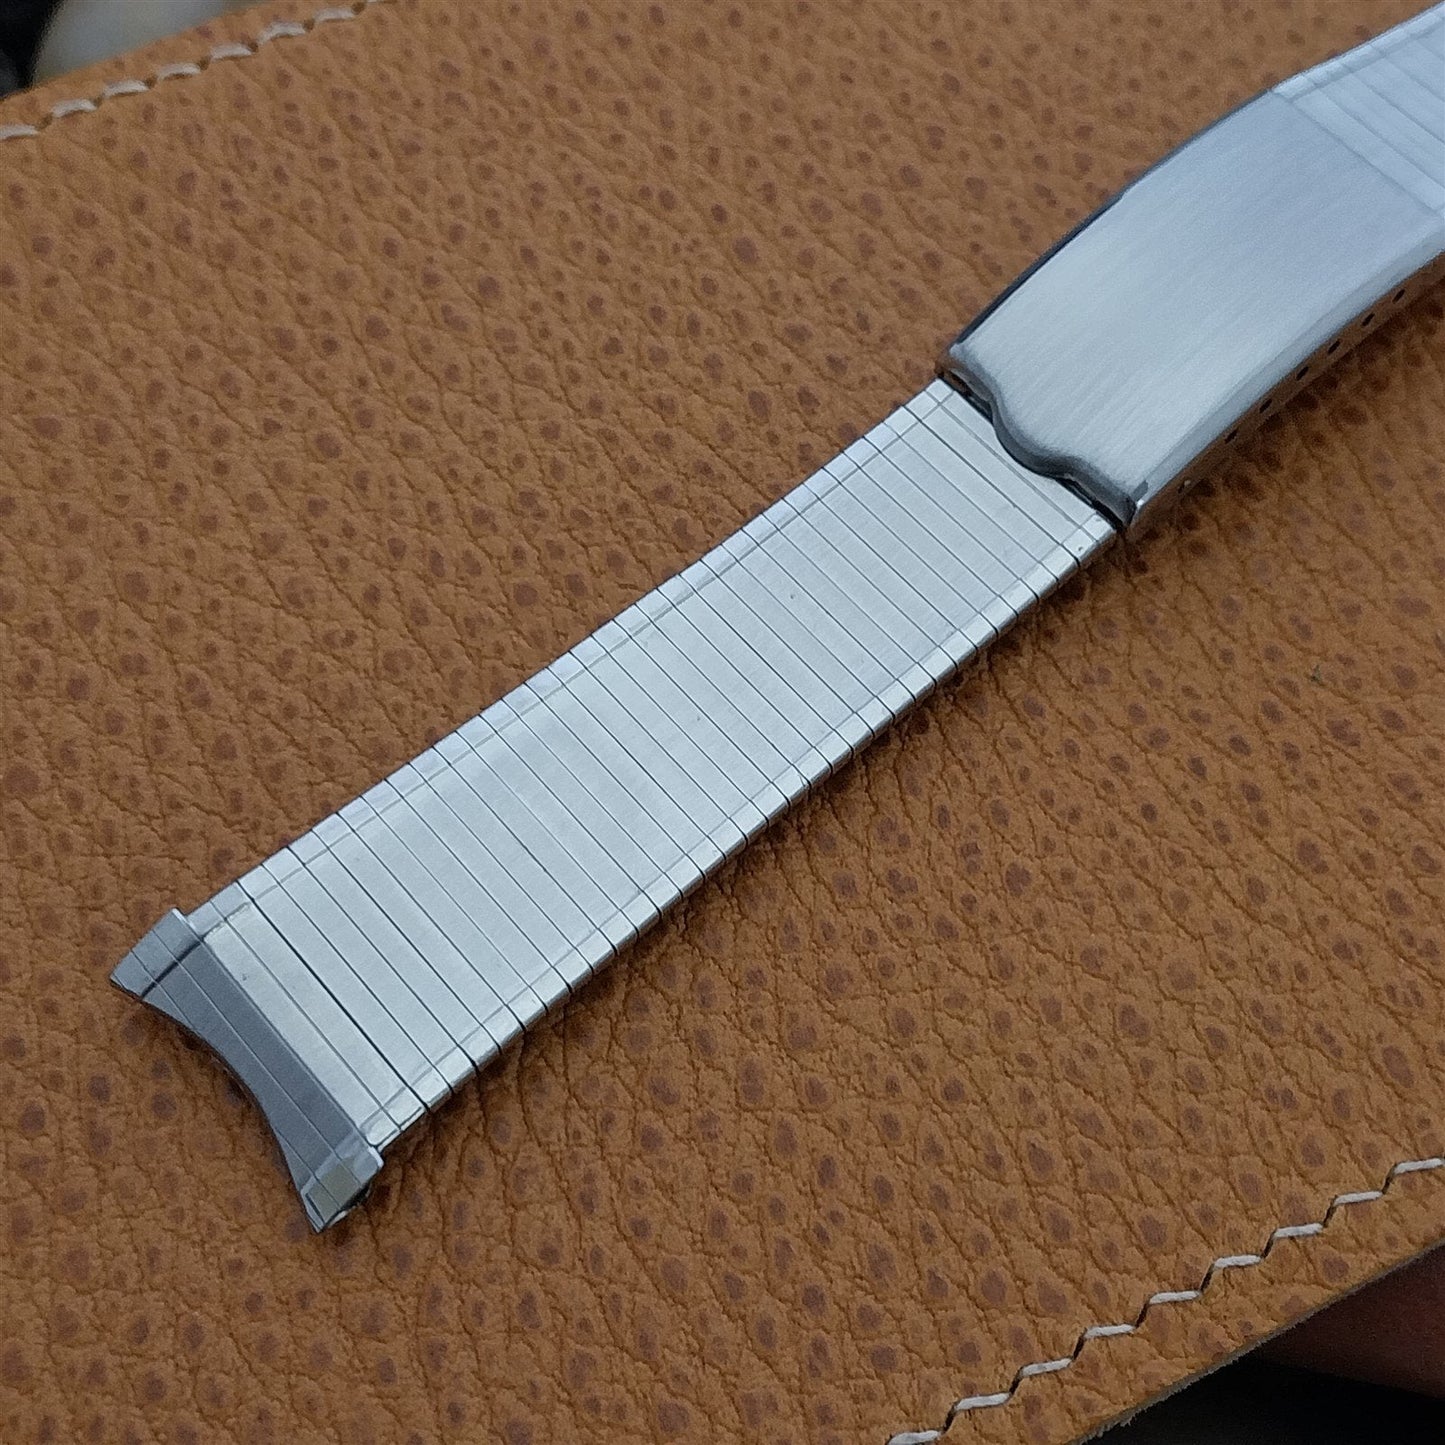 19mm JB Champion Stainless Steel nos 1960s Vintage Watch Band